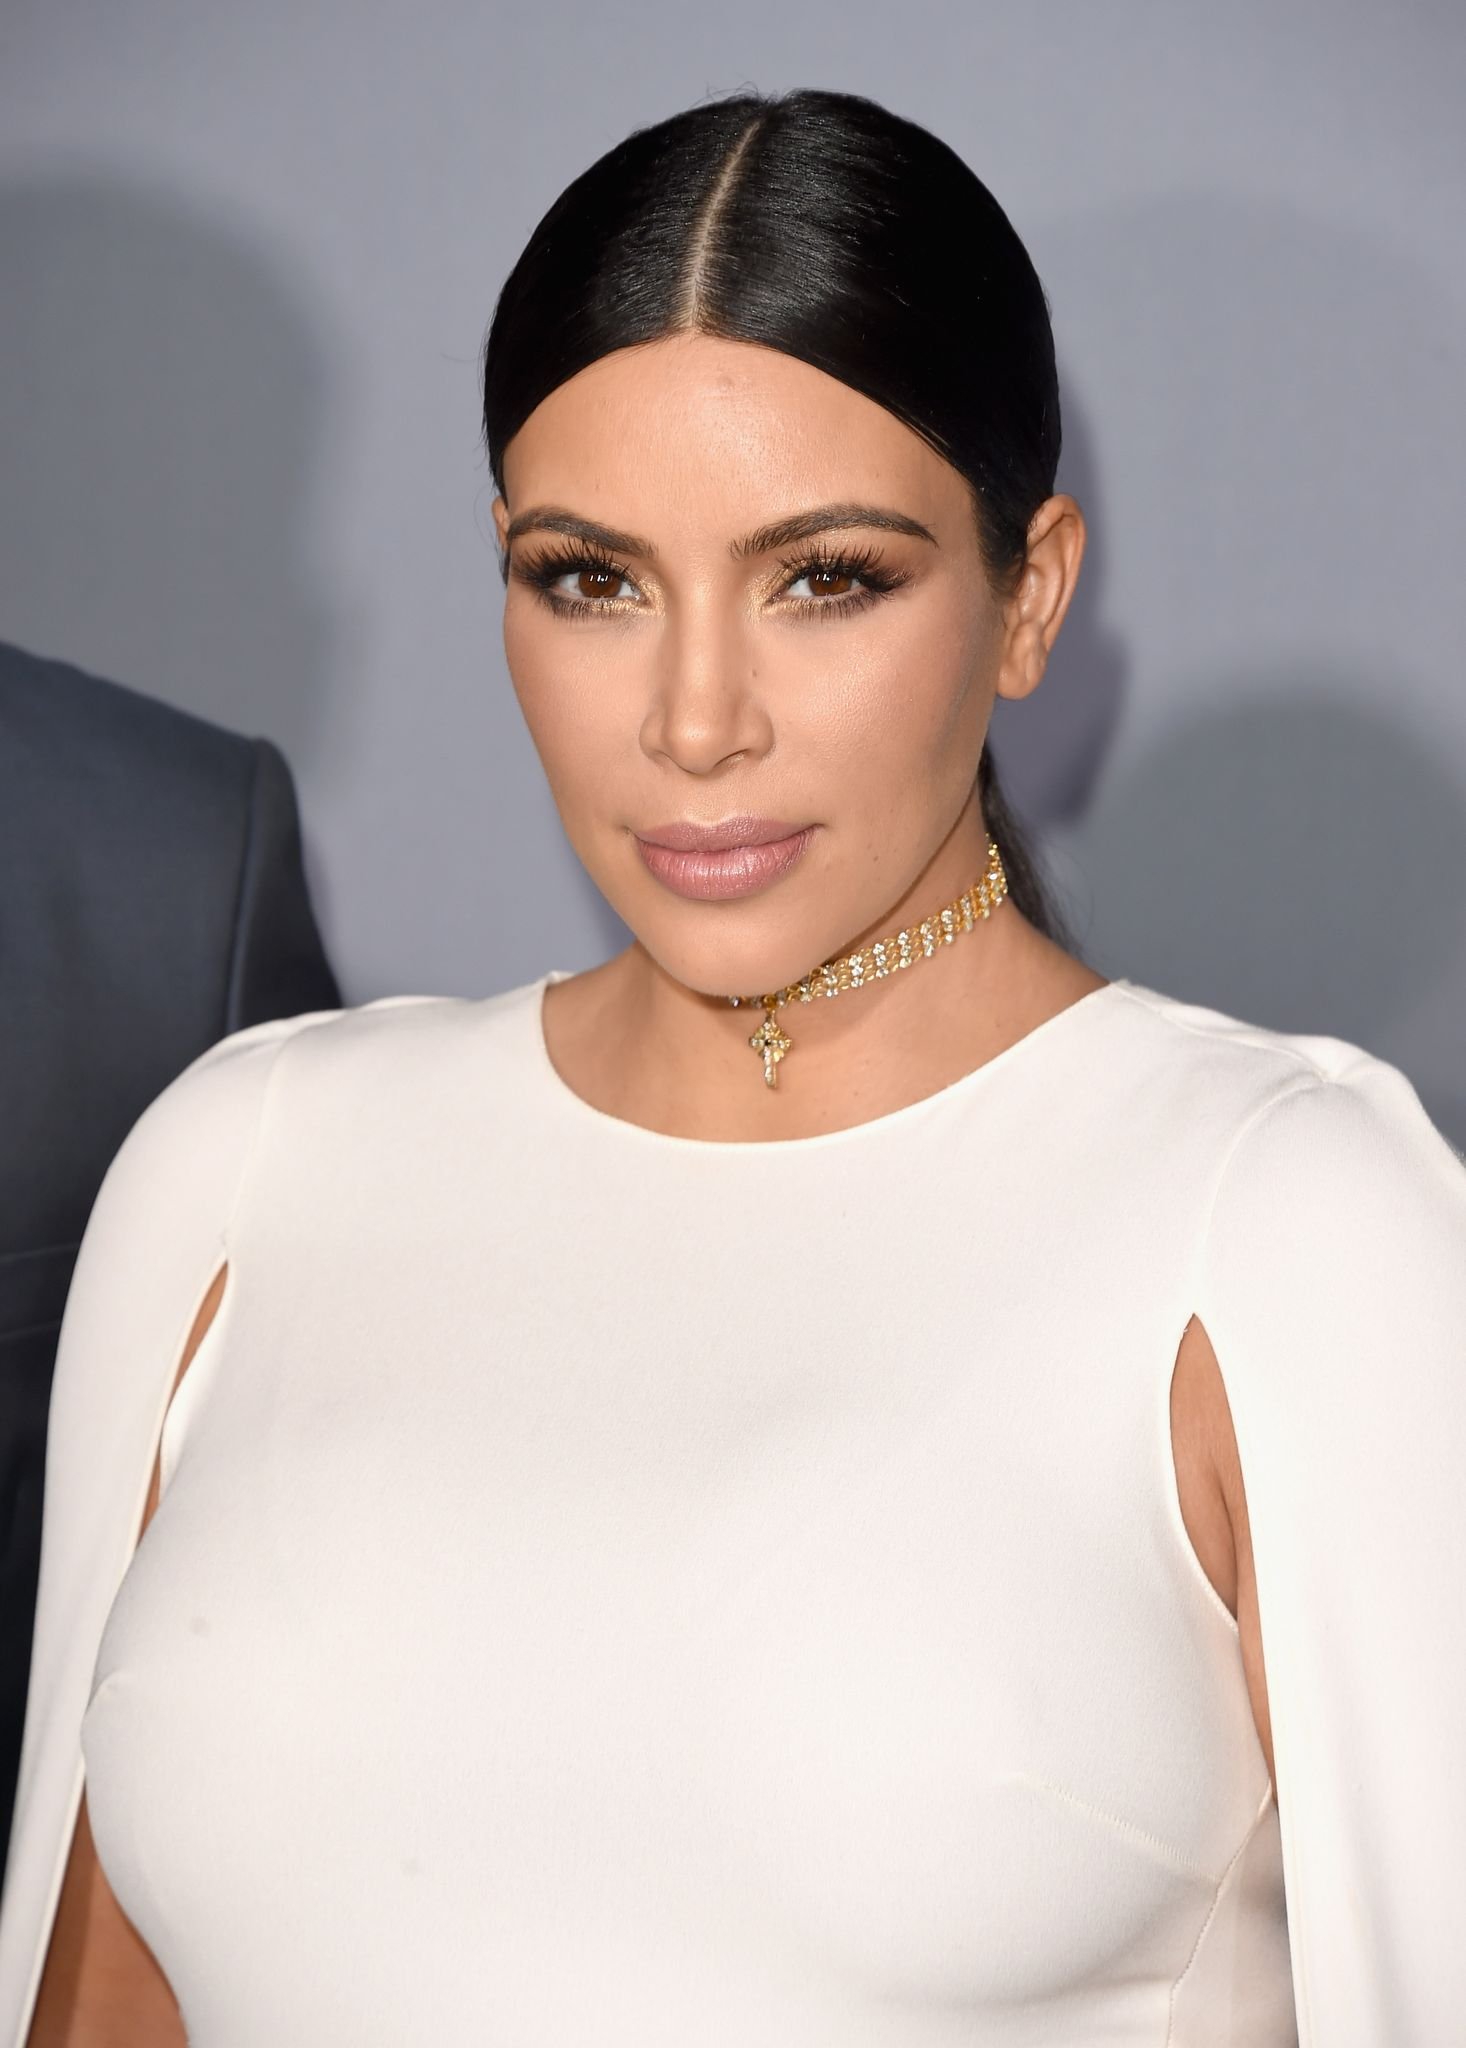 Television personality Kim Kardashian attends the InStyle Awards at Getty Center on October 26, 2015 in Los Angeles, California | Photo: Getty Images